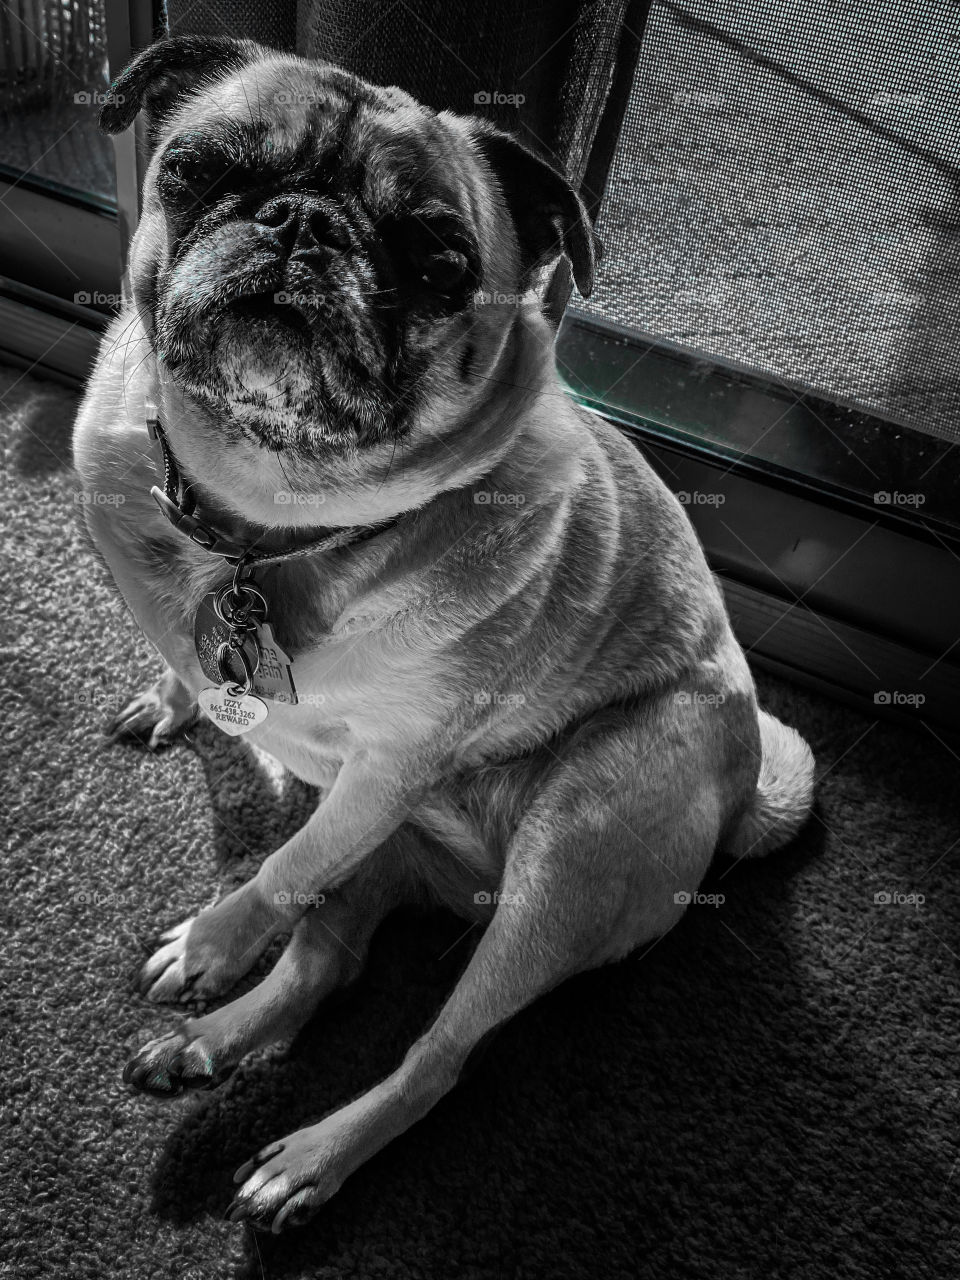 Pug in the Sun. Izzy loves to sun herself in front of the window.